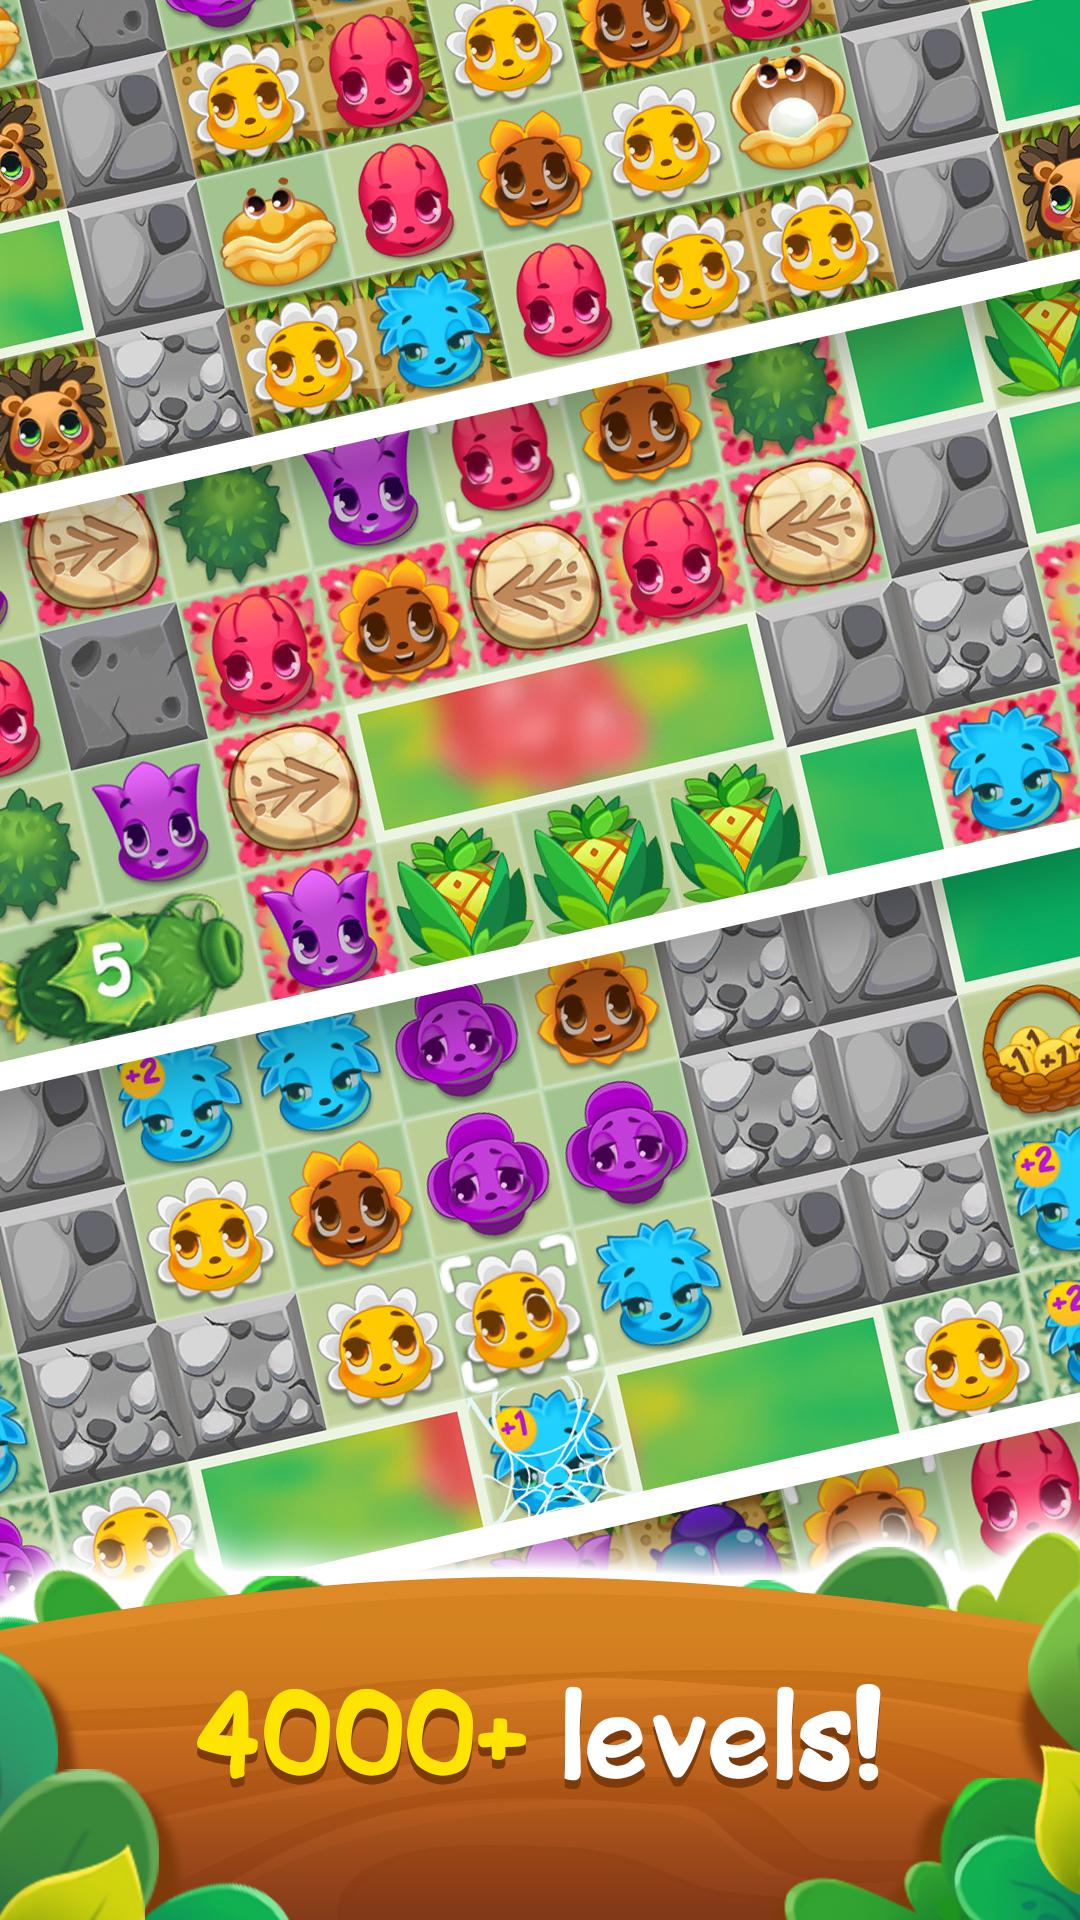 Flower Story - Match 3 Puzzle Apk 1.6.6 For Android – Download Flower Story  - Match 3 Puzzle Apk Latest Version From Apkfab.Com